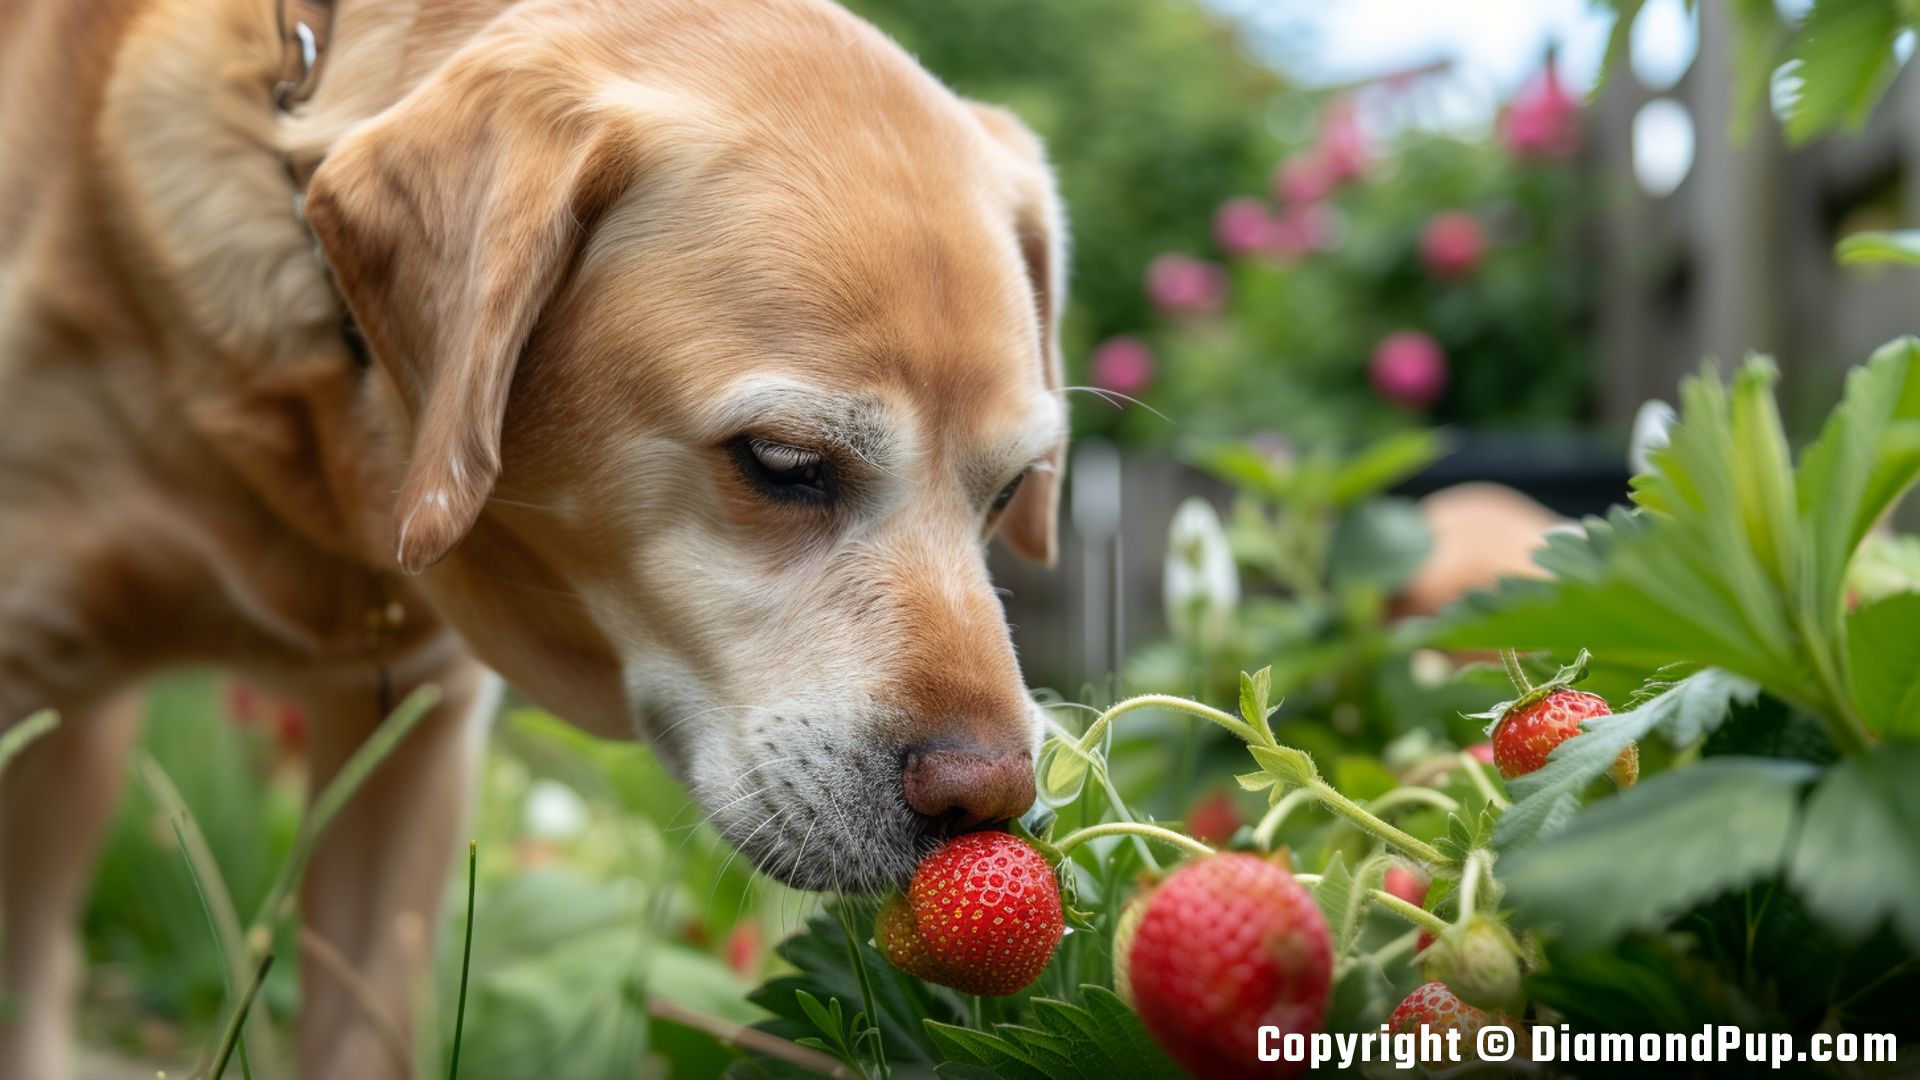 Photograph of a Playful Labrador Eating Strawberries